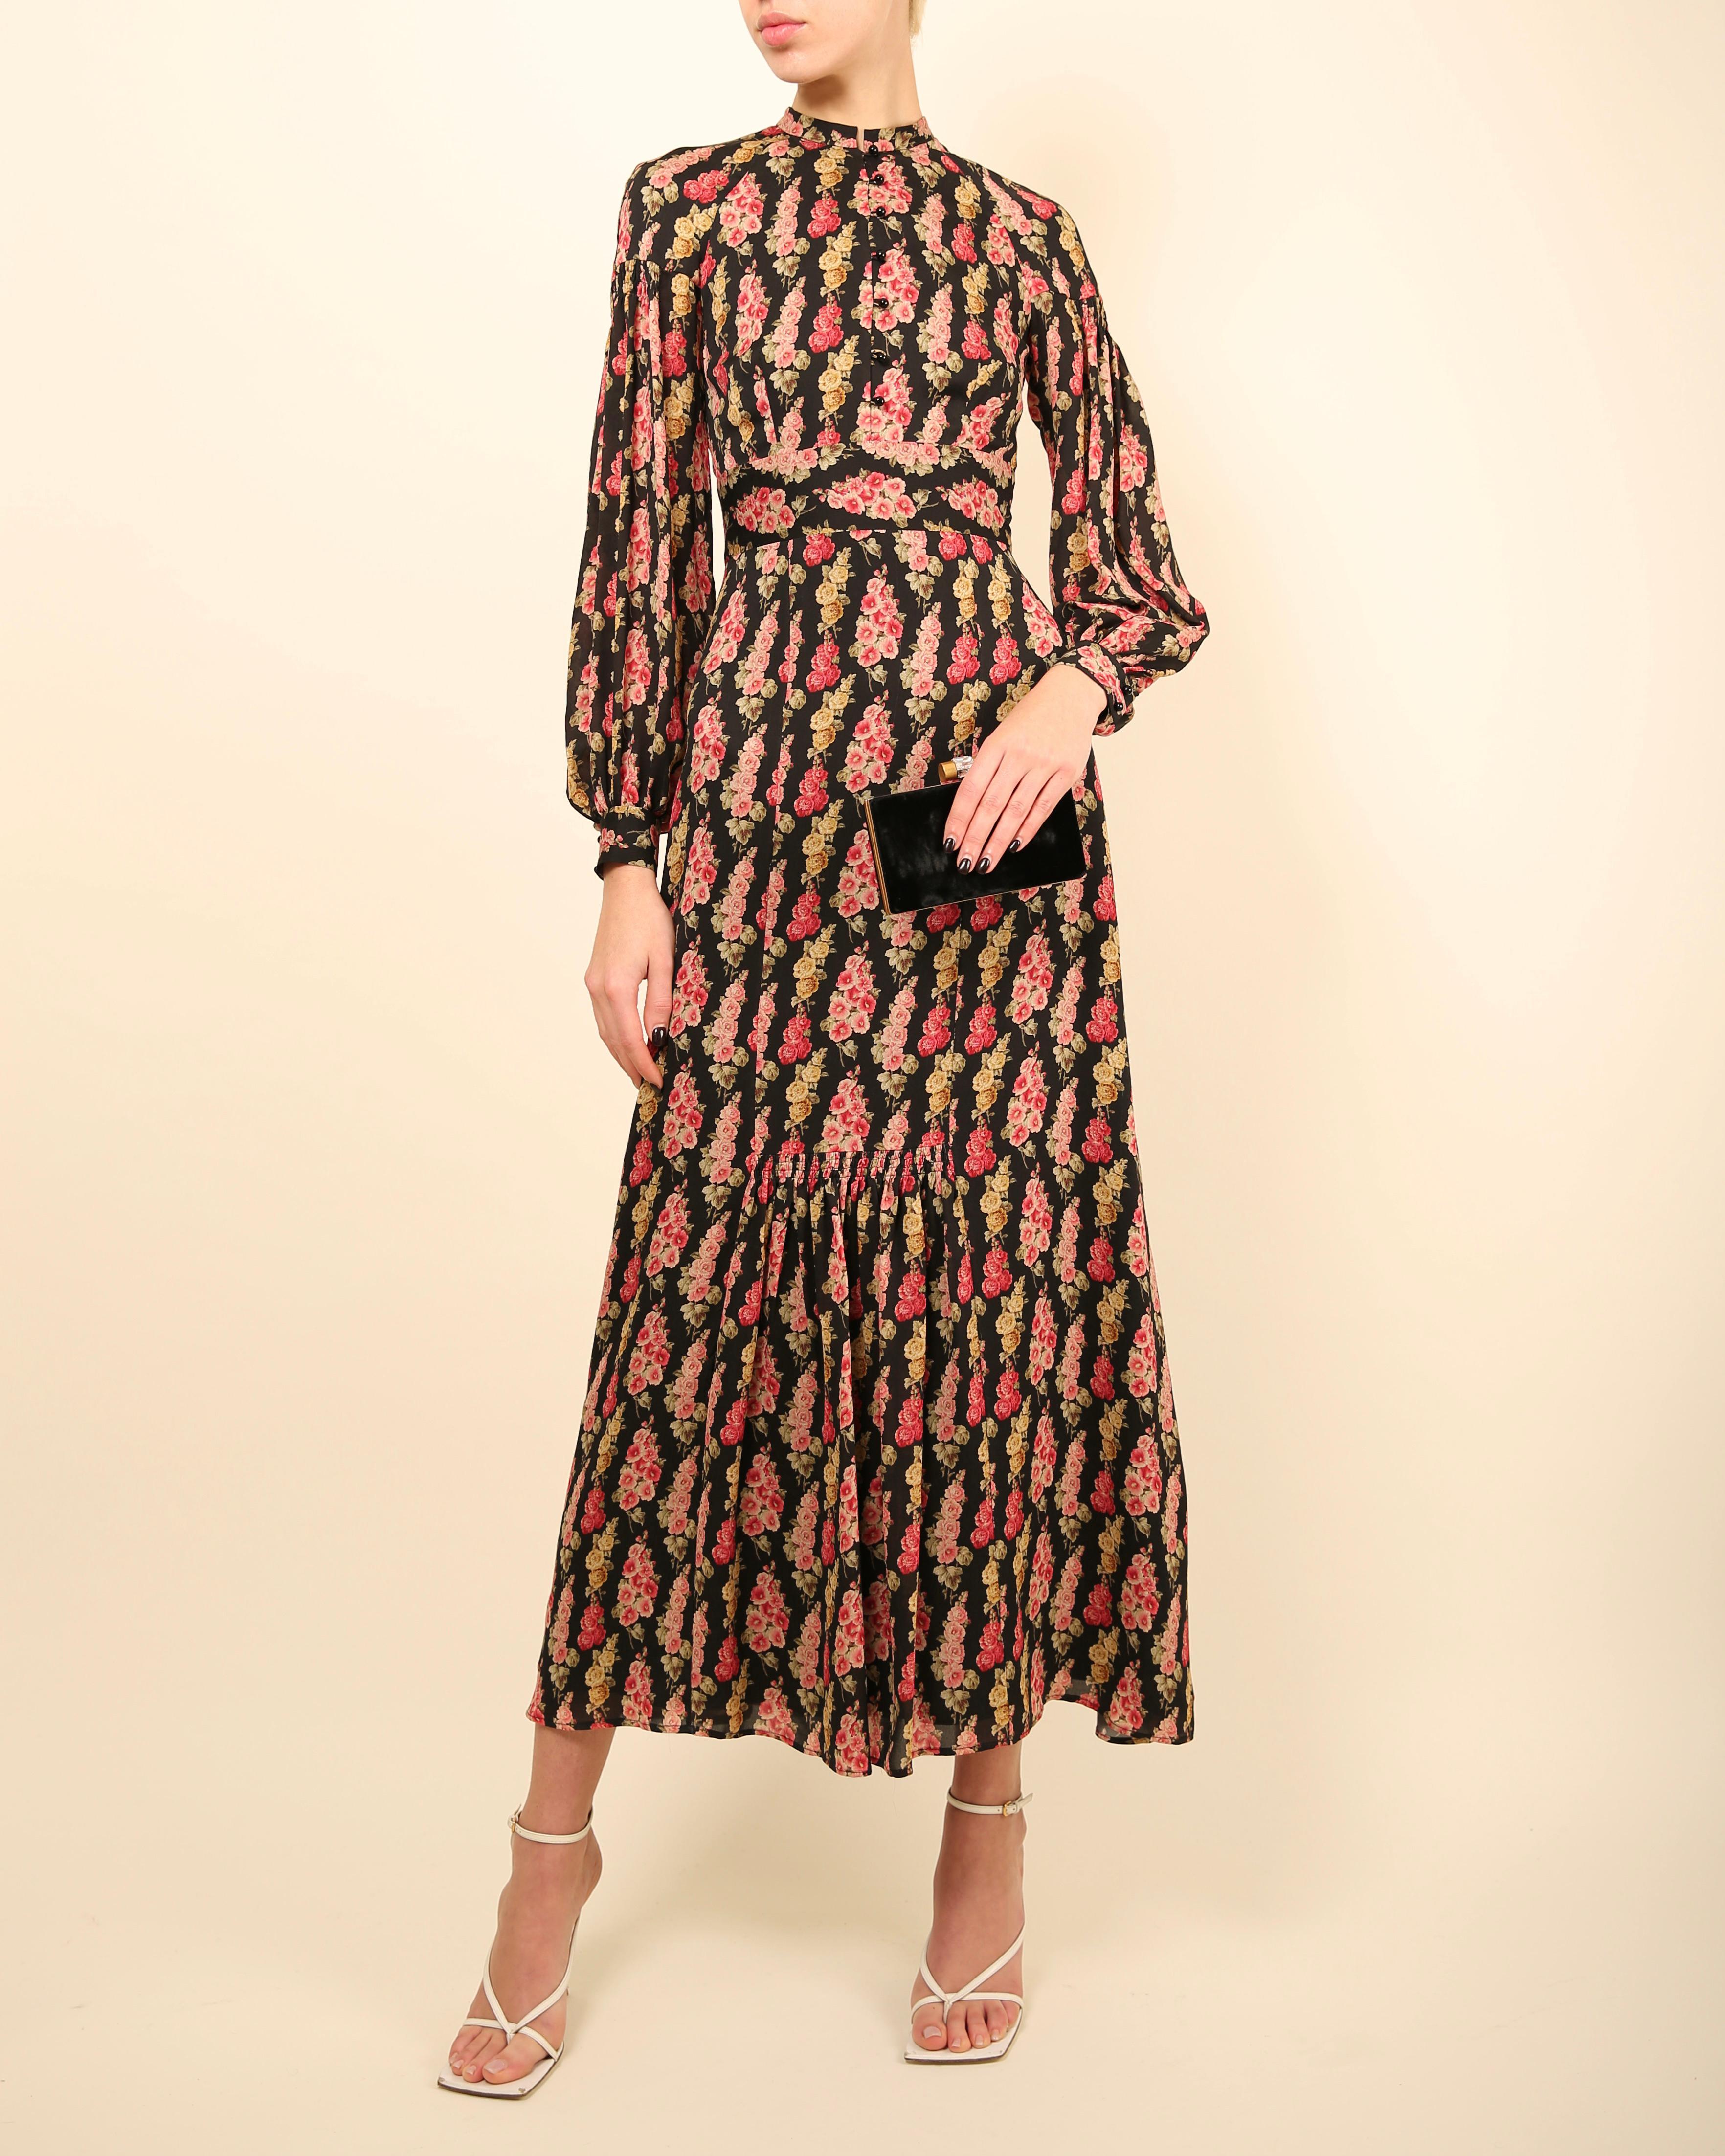 Vilshenko black pink floral print silk puff sleeve mock neck maxi dress XS - S In Excellent Condition For Sale In Paris, FR